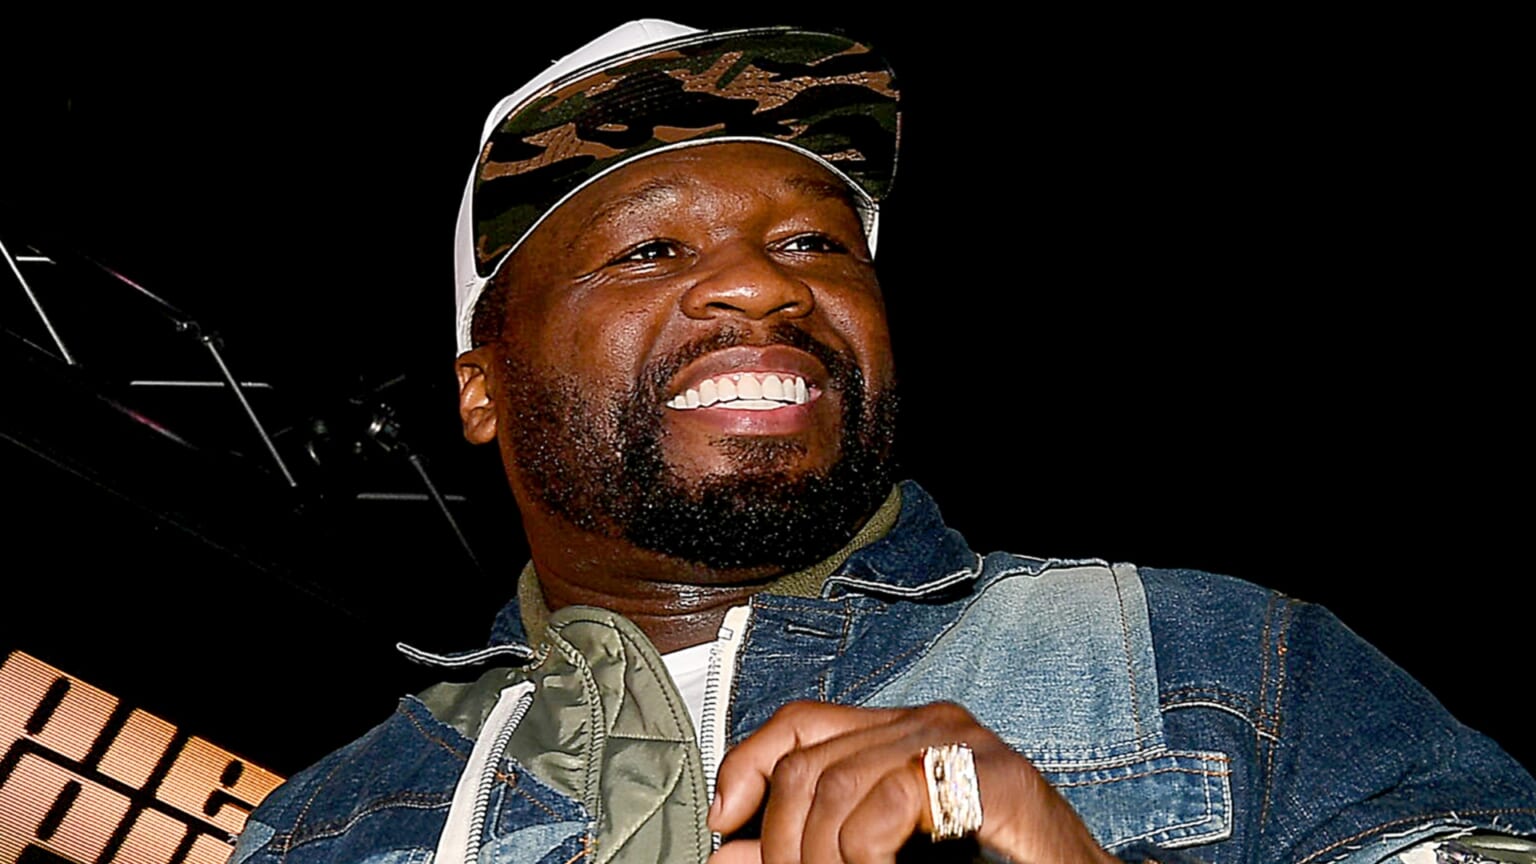 Florida mayor on 50 Cent Super Bowl party 'It's not safe or smart